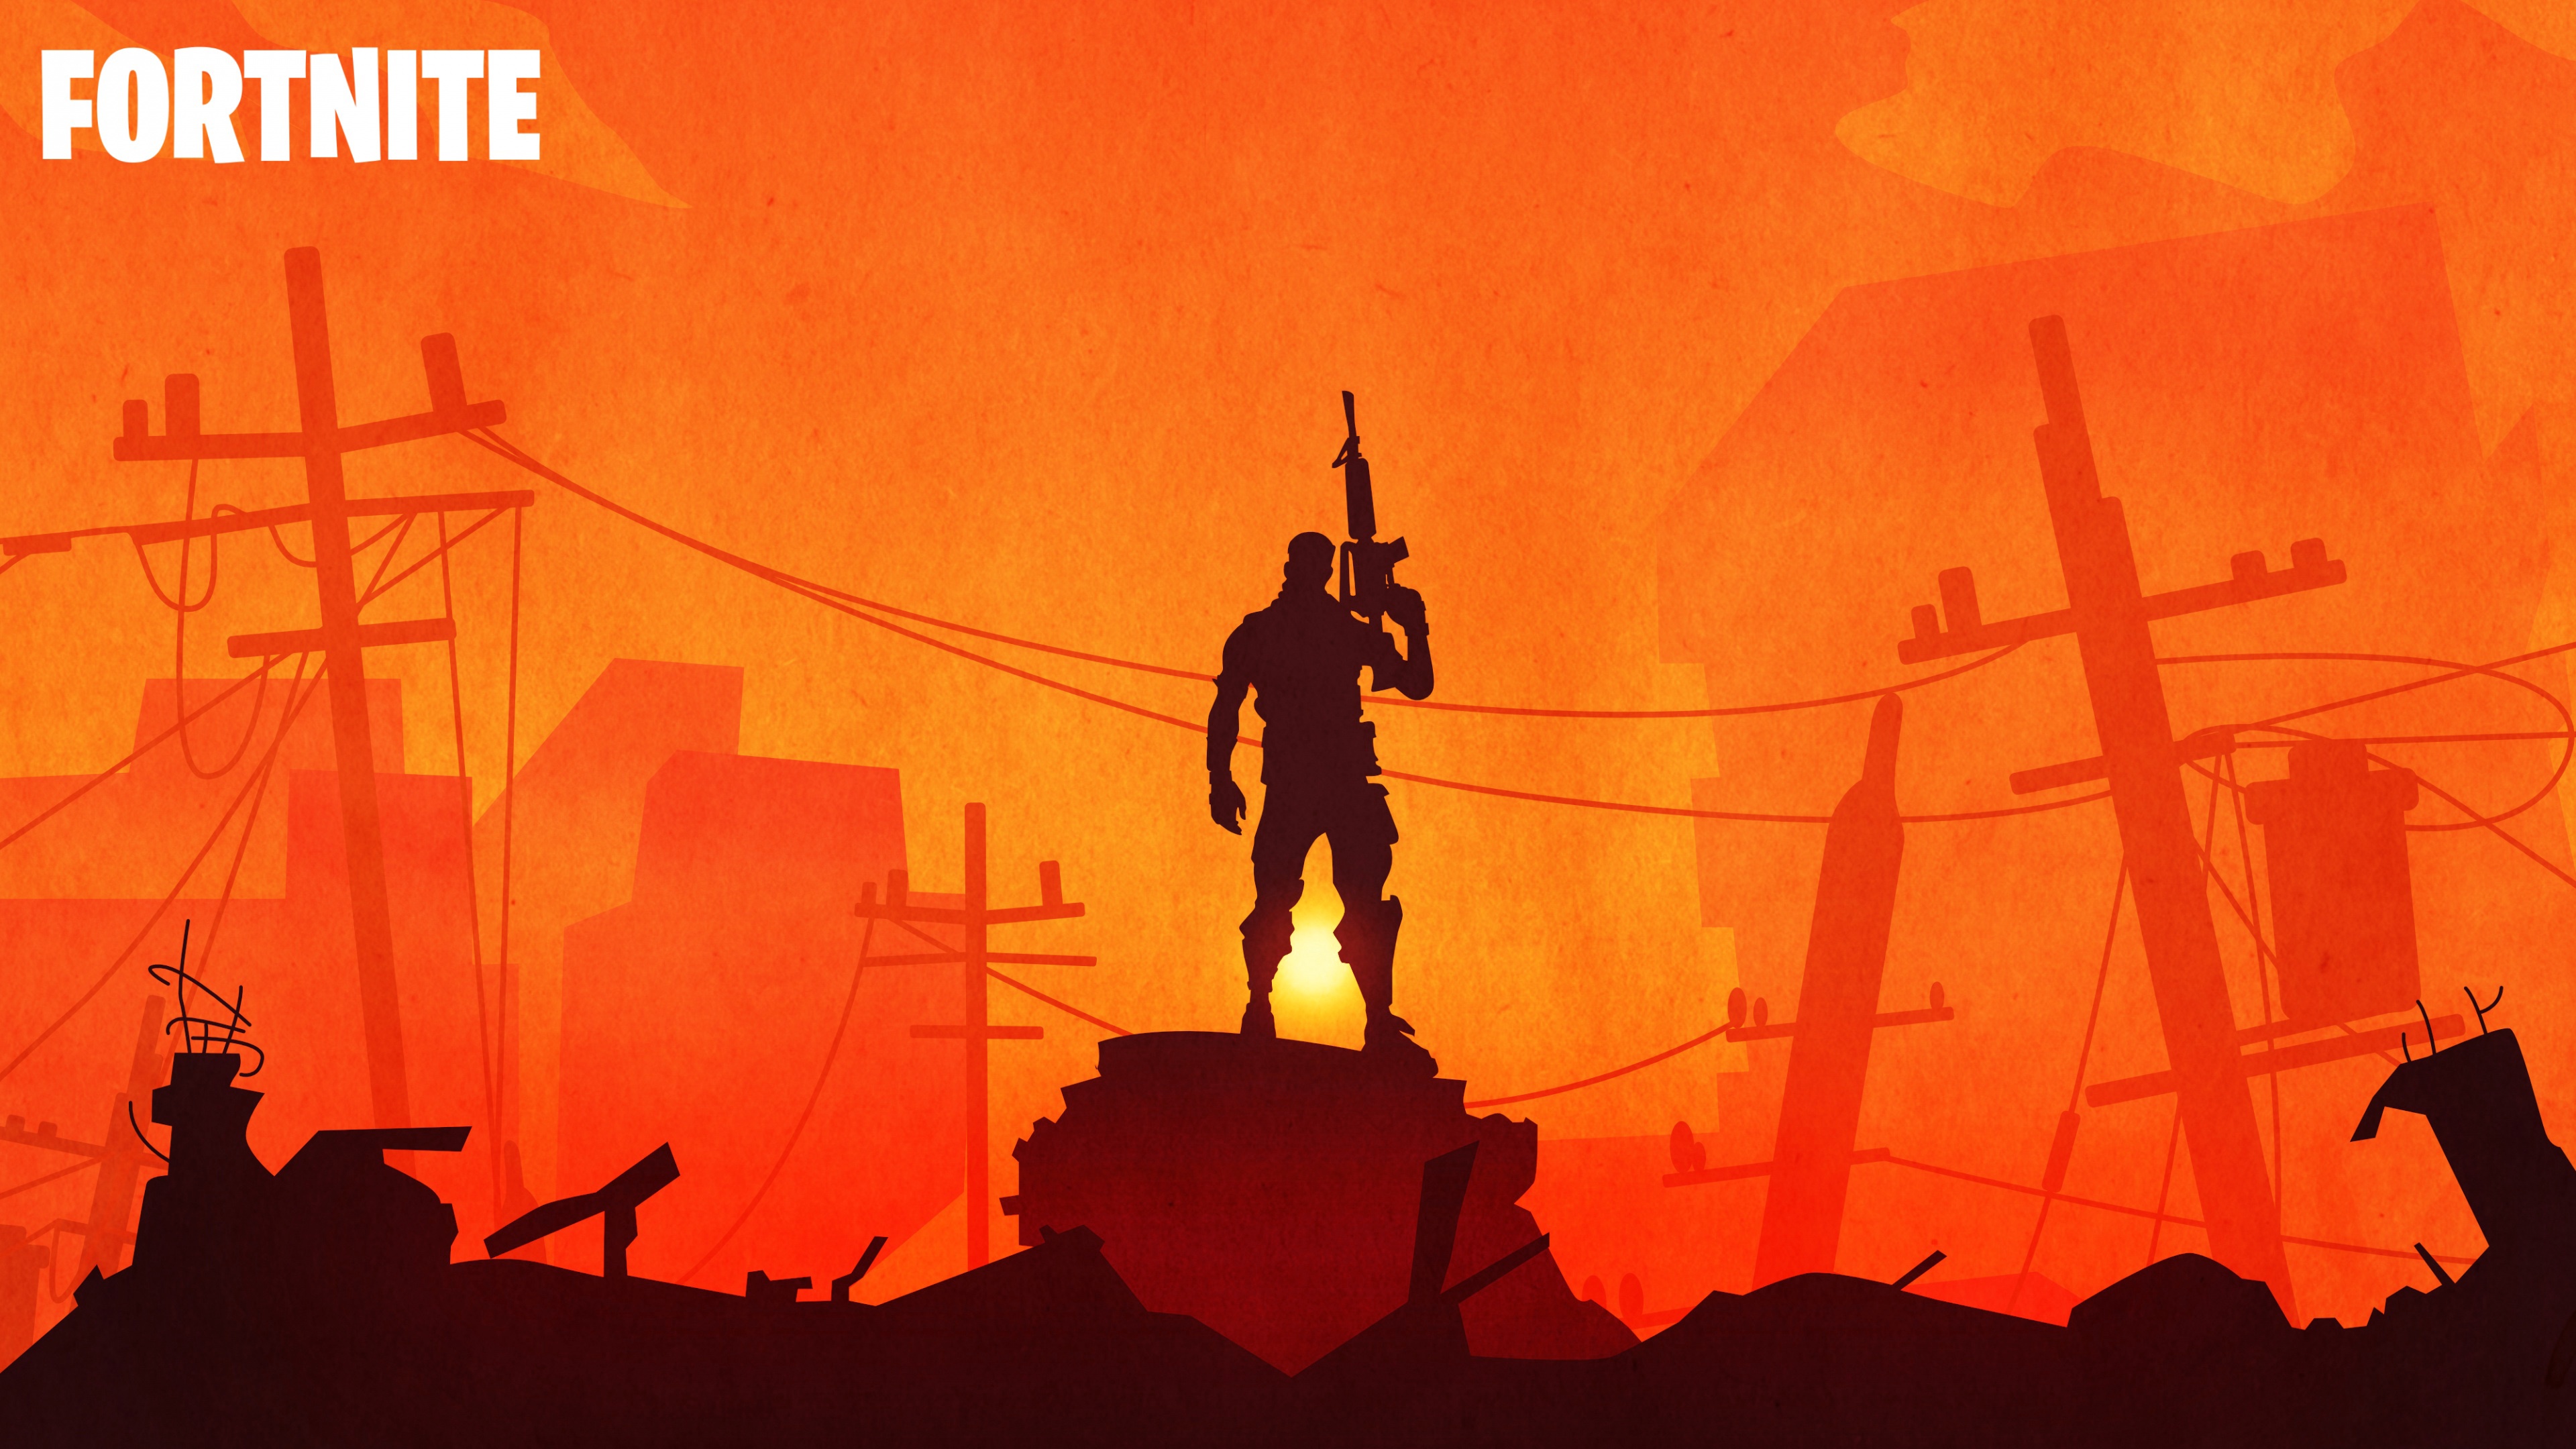 Widescreen image sunset, warrior, video game, fortnite